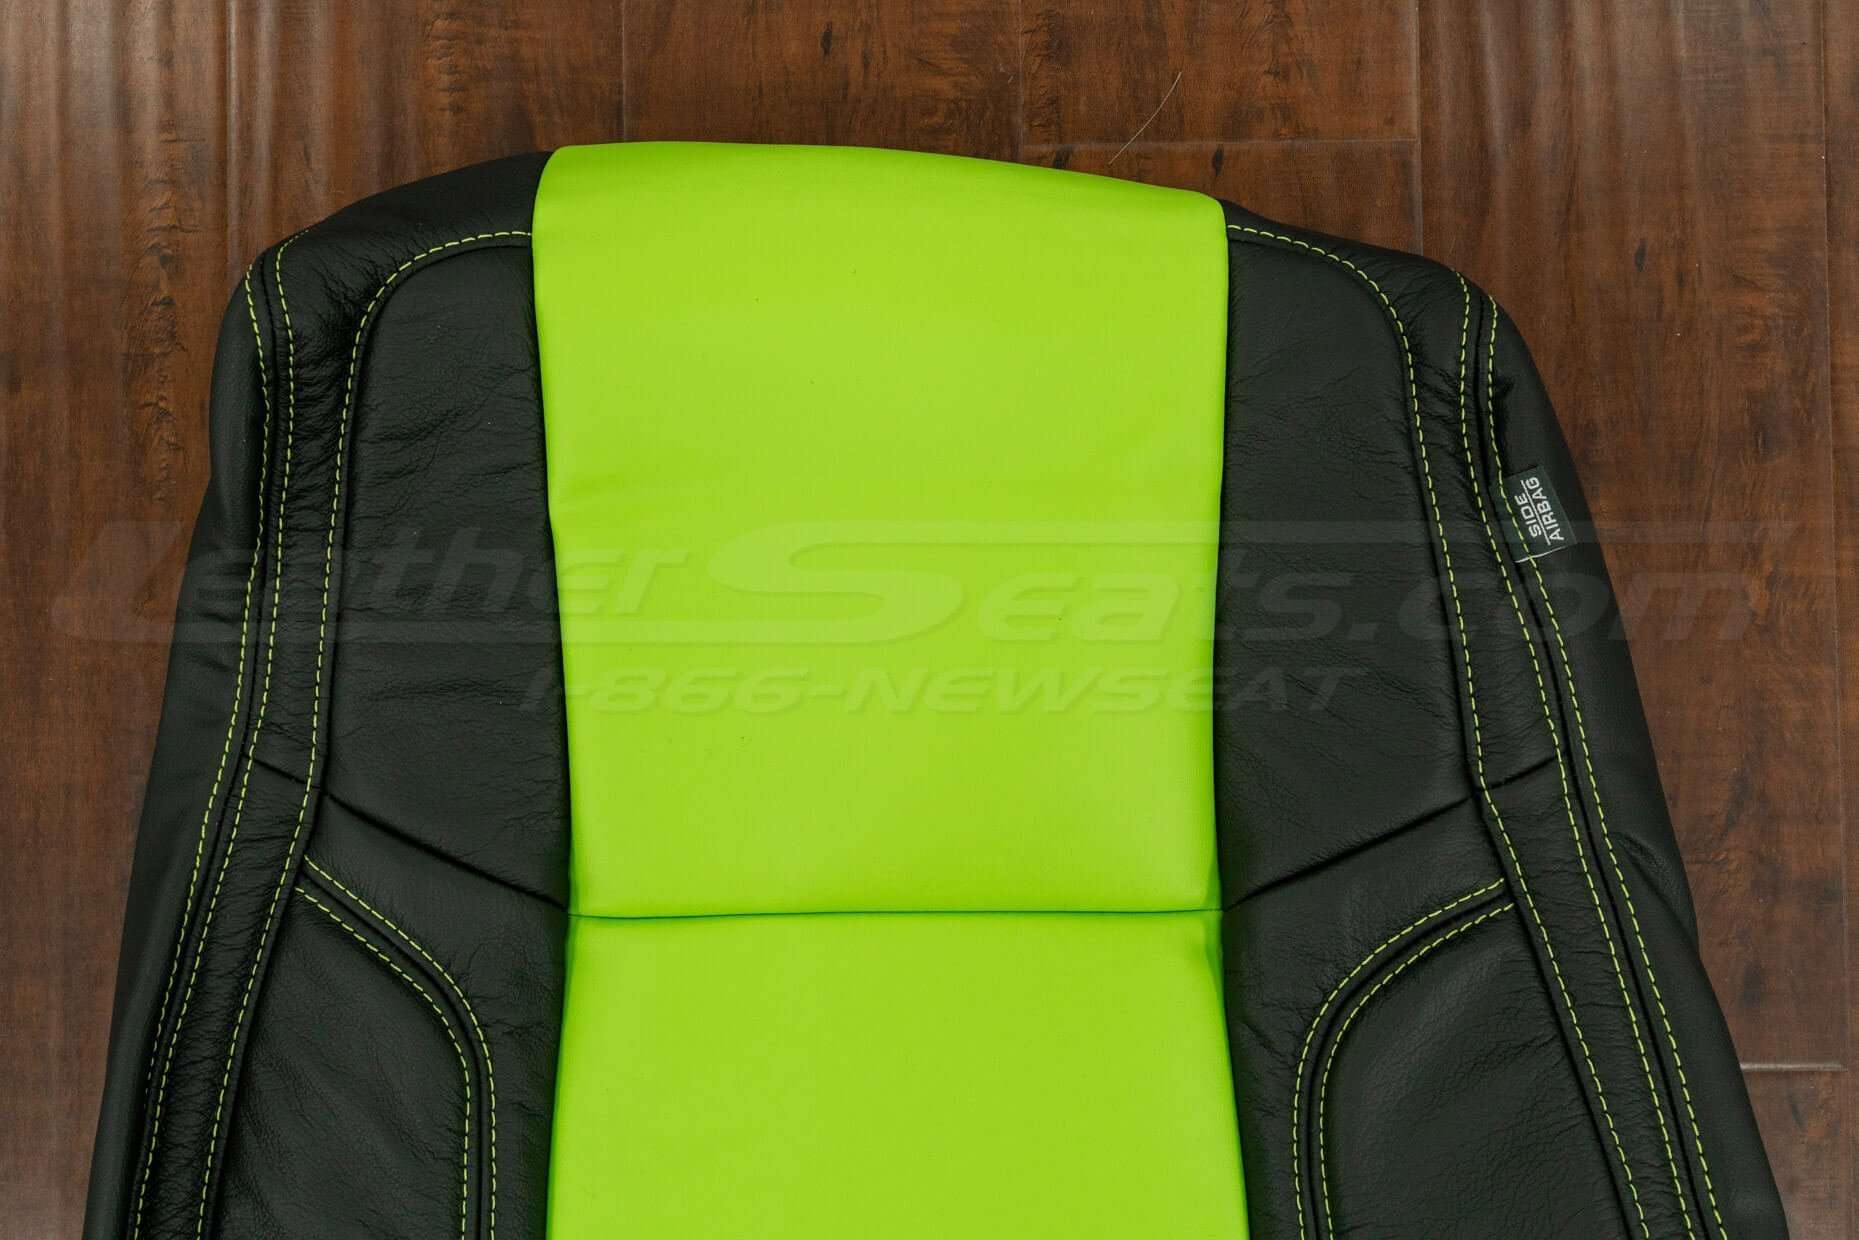 Upper section of two-tone leather headrest